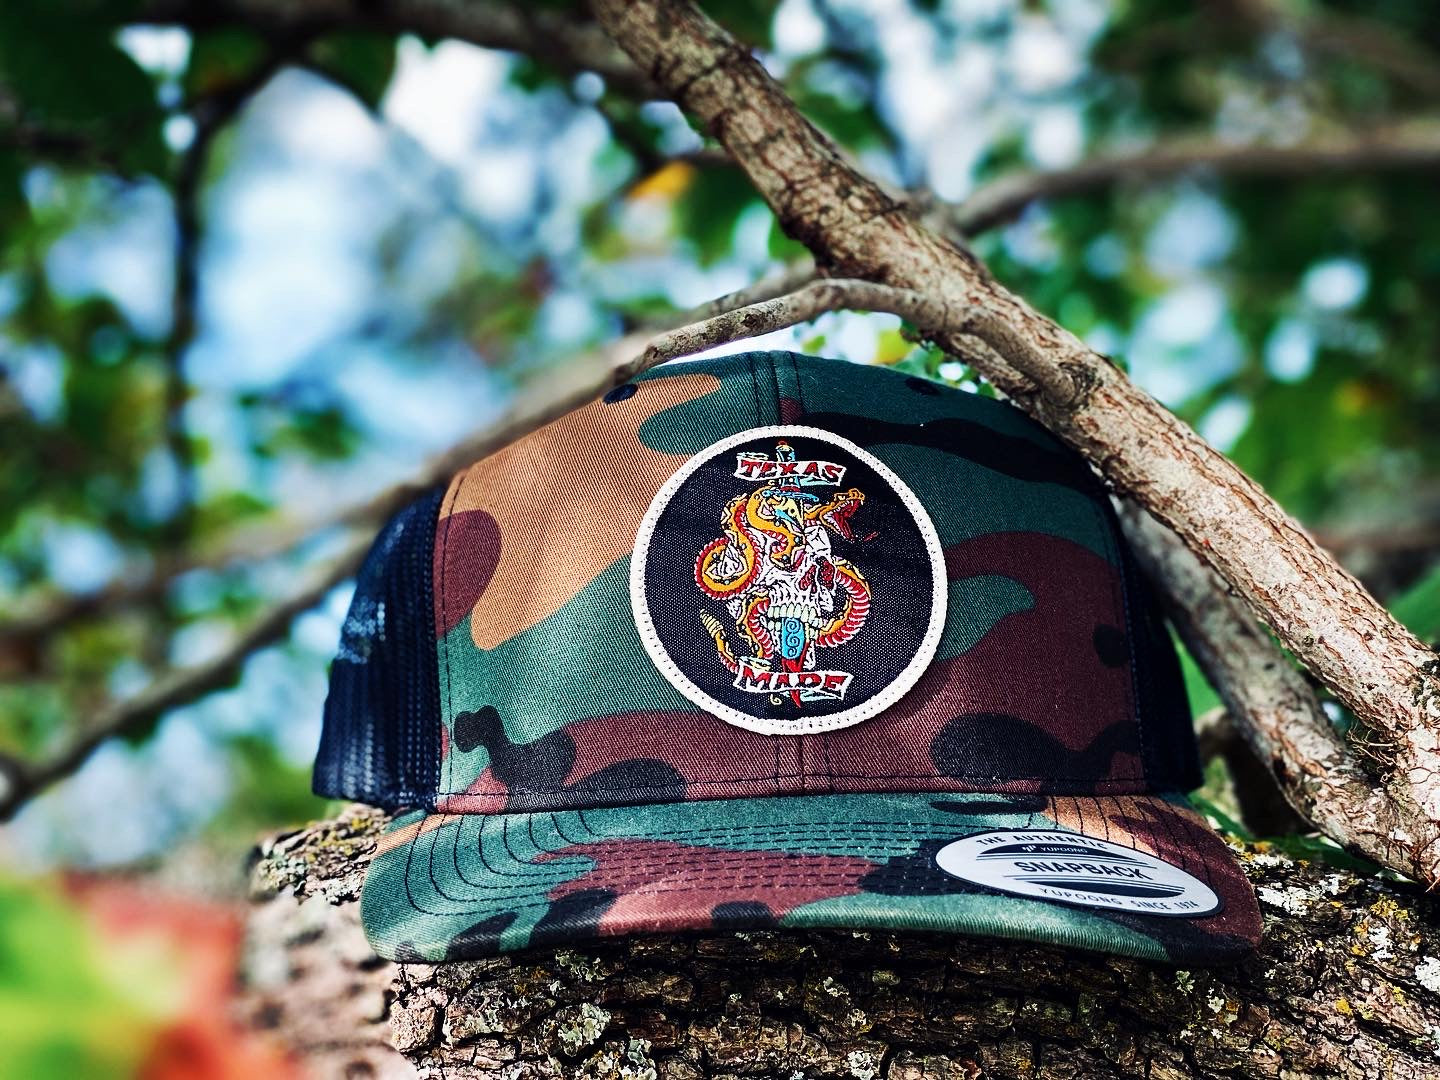 The Bowie Rattler Camo/Black SnapBack